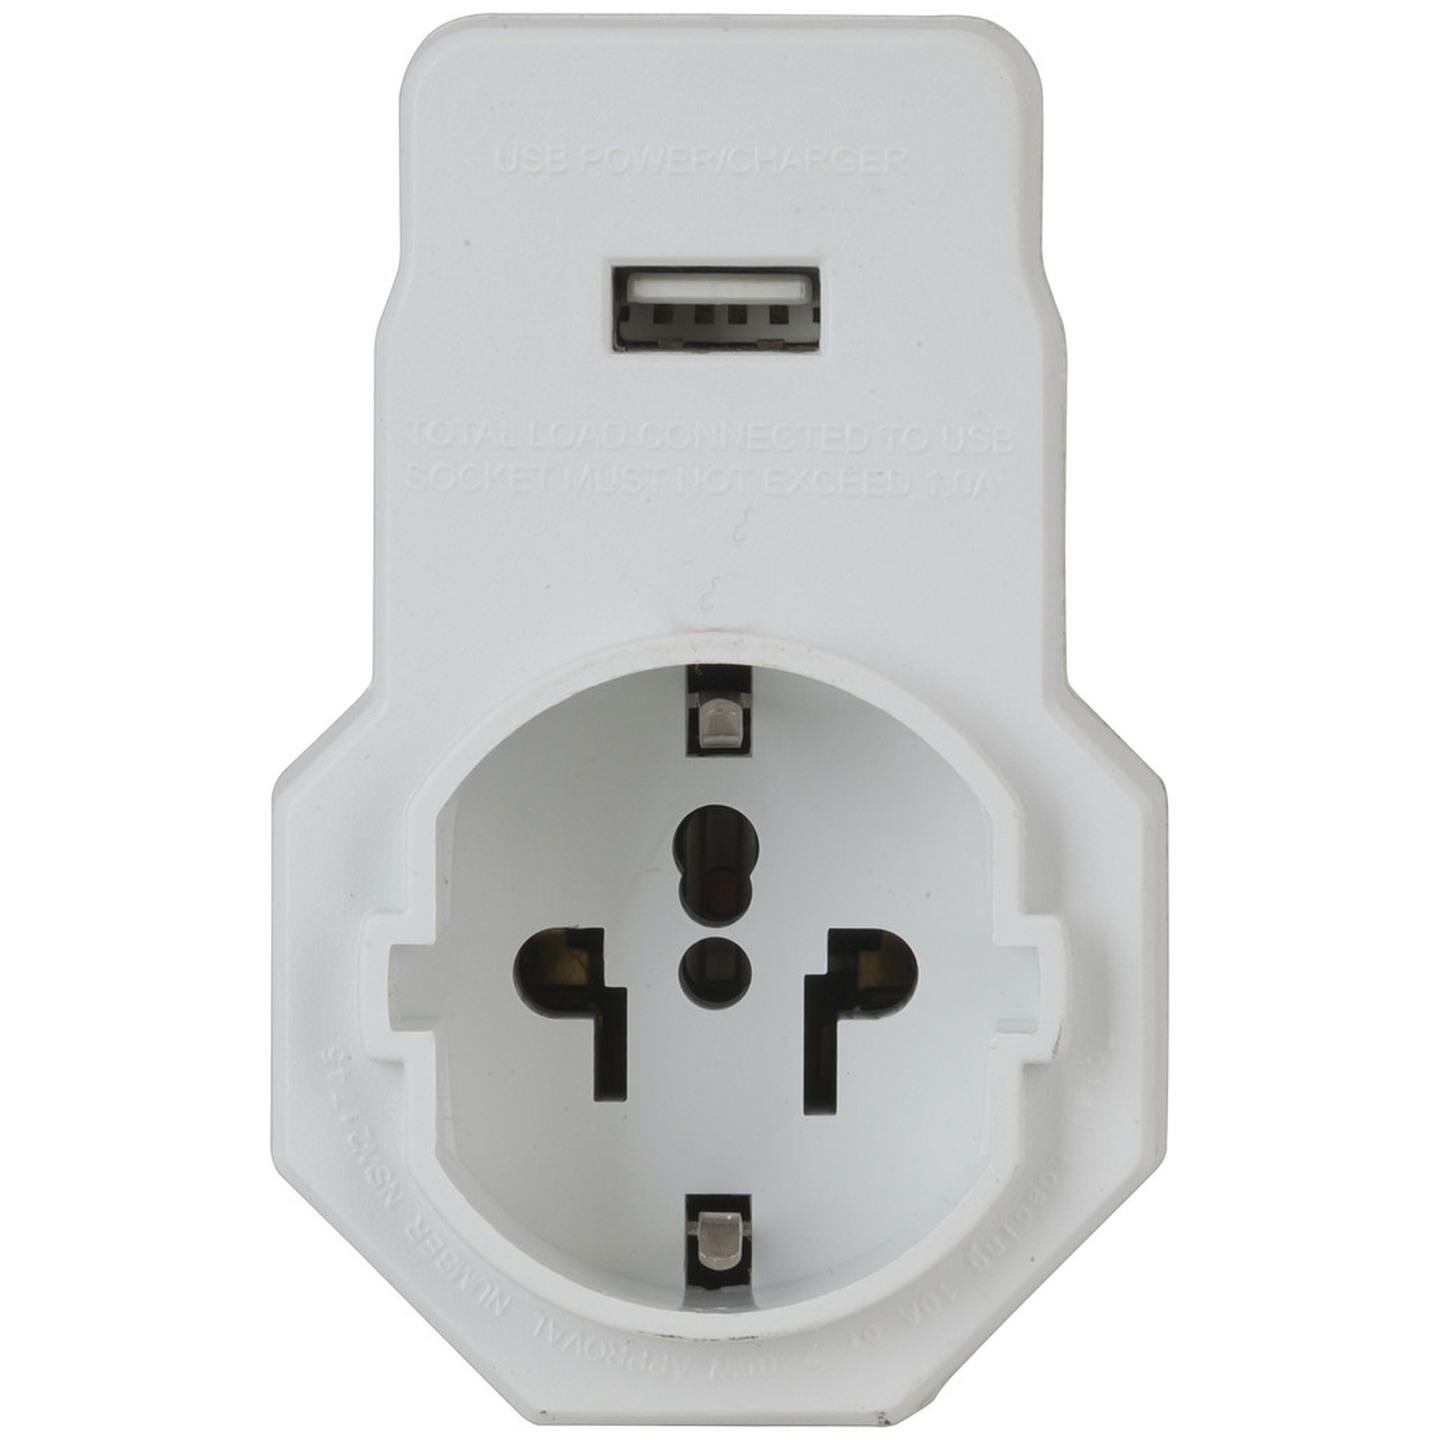 Inbound Mains Travel Adaptor for Europe and USA with USB Port